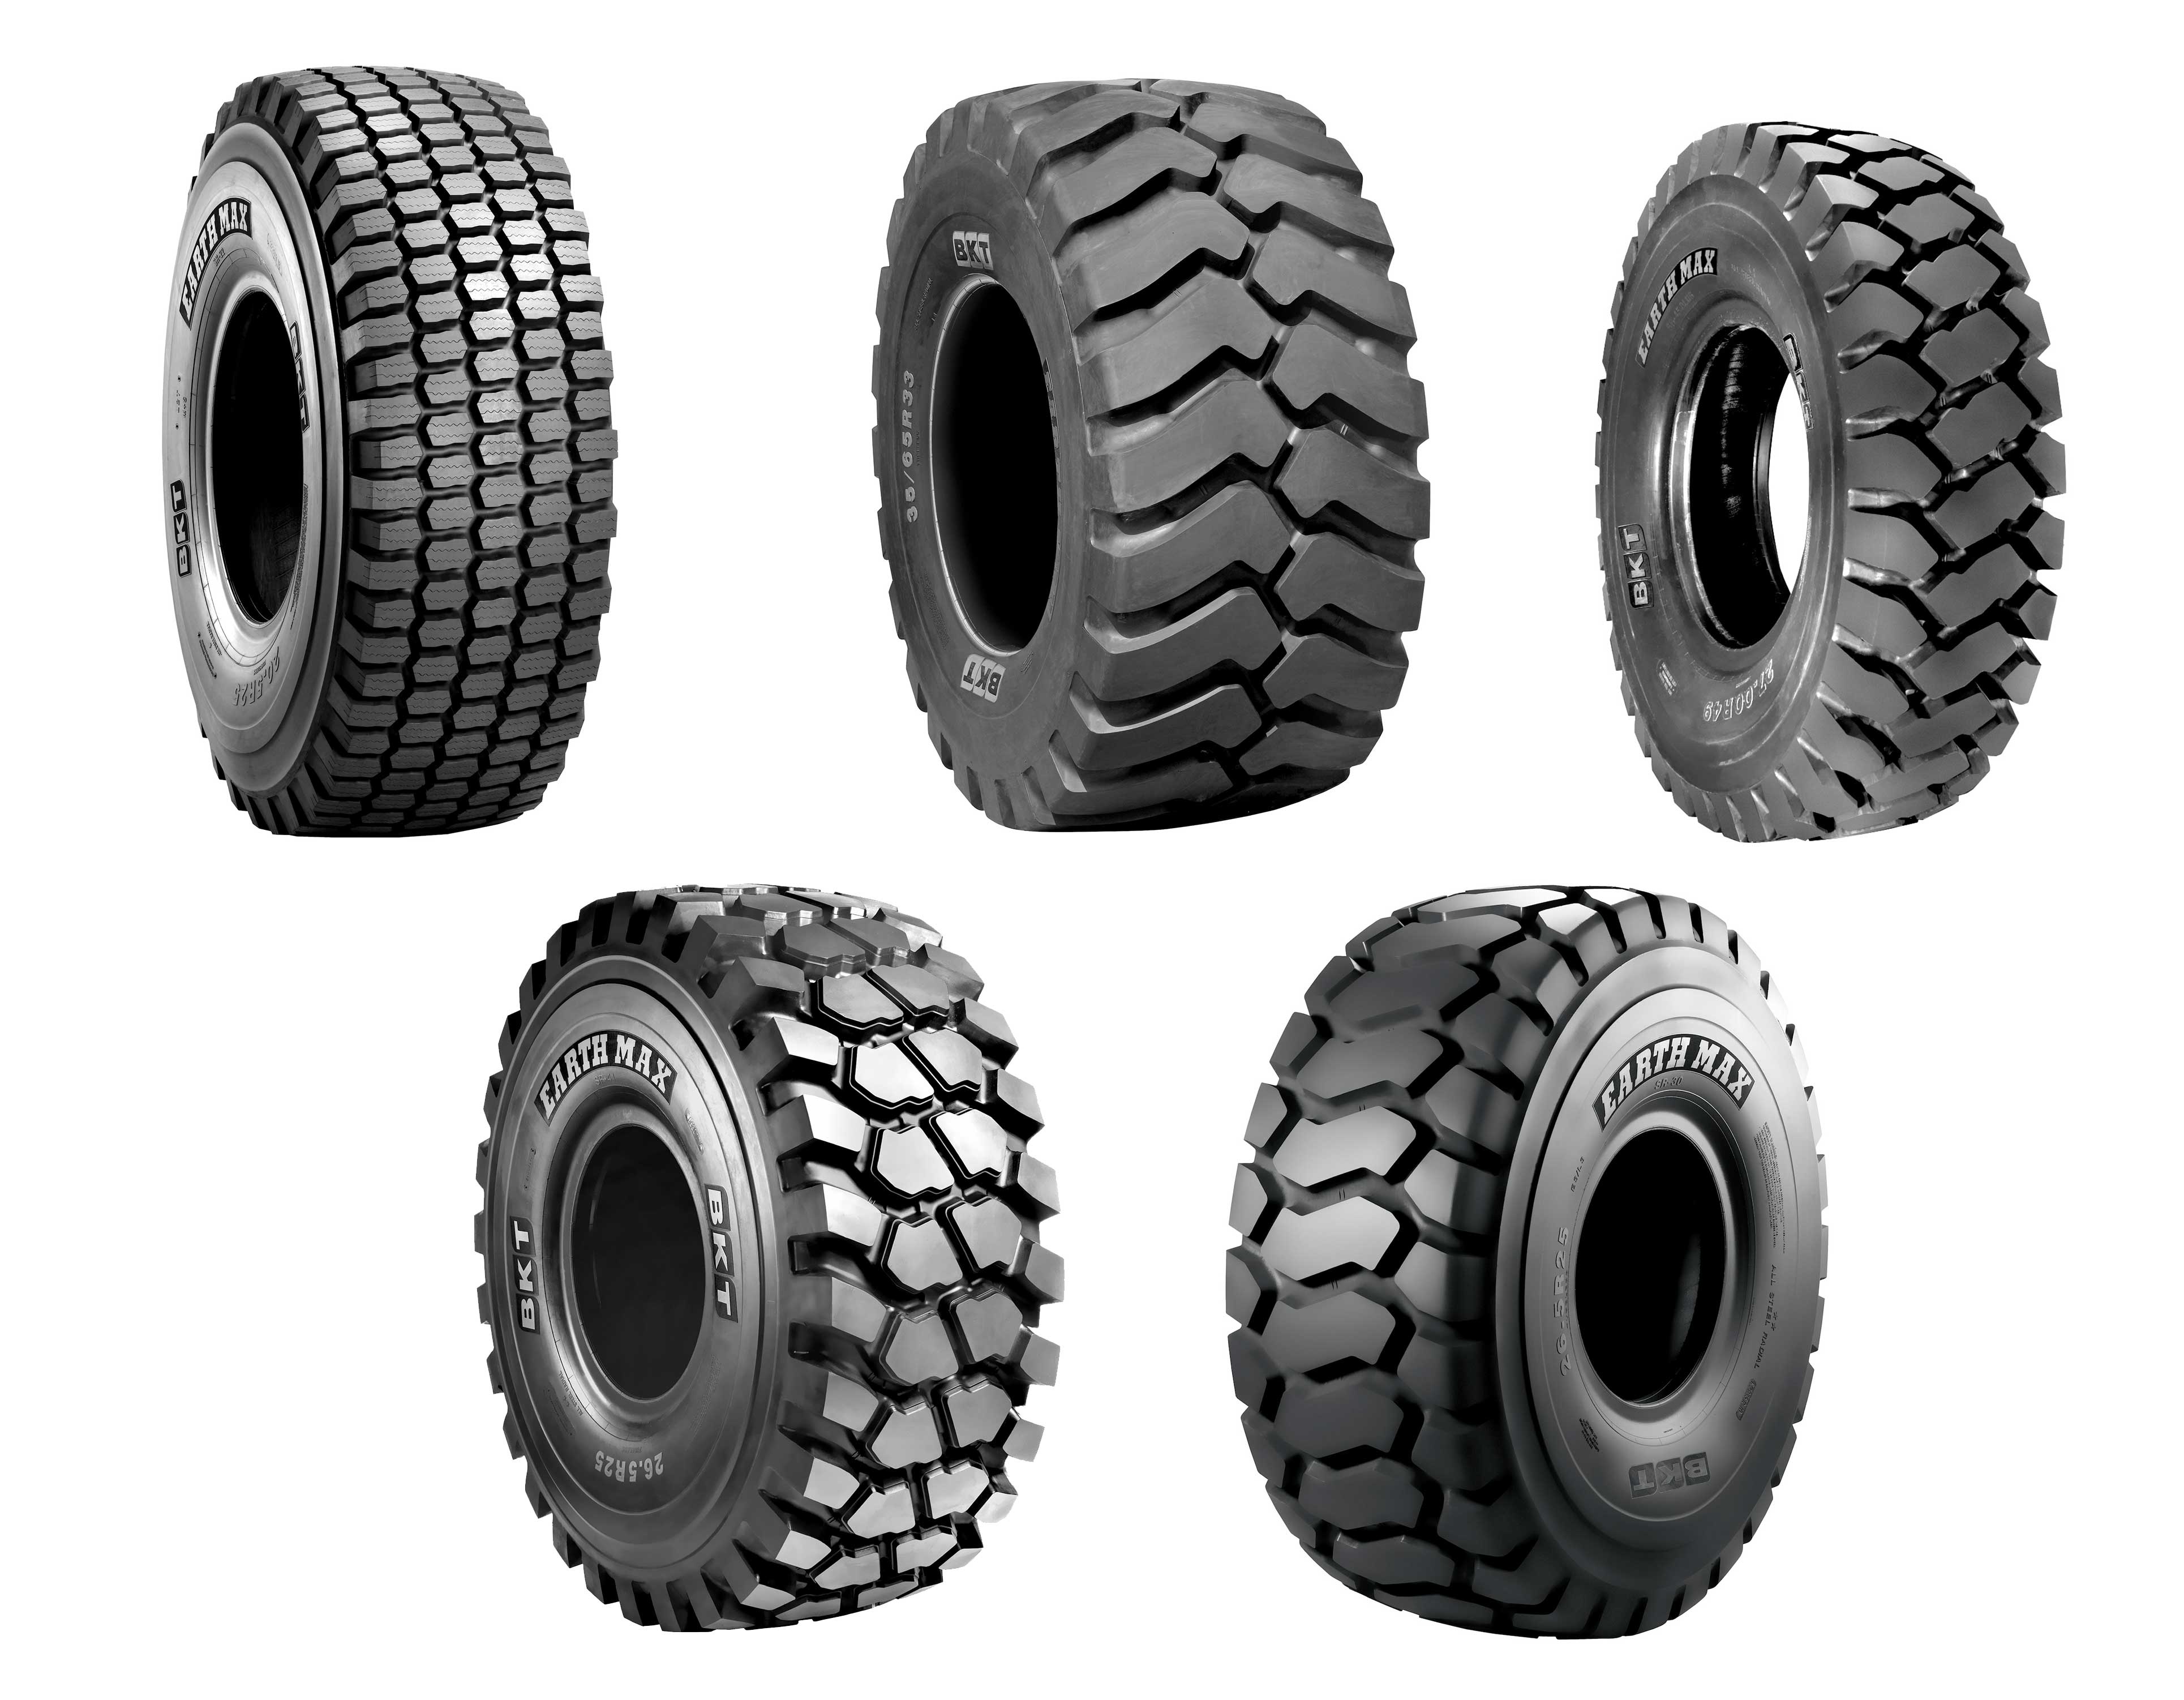 BKT to Showcase Tires from Earthmax range at CONEXPO-CON/AGG Show